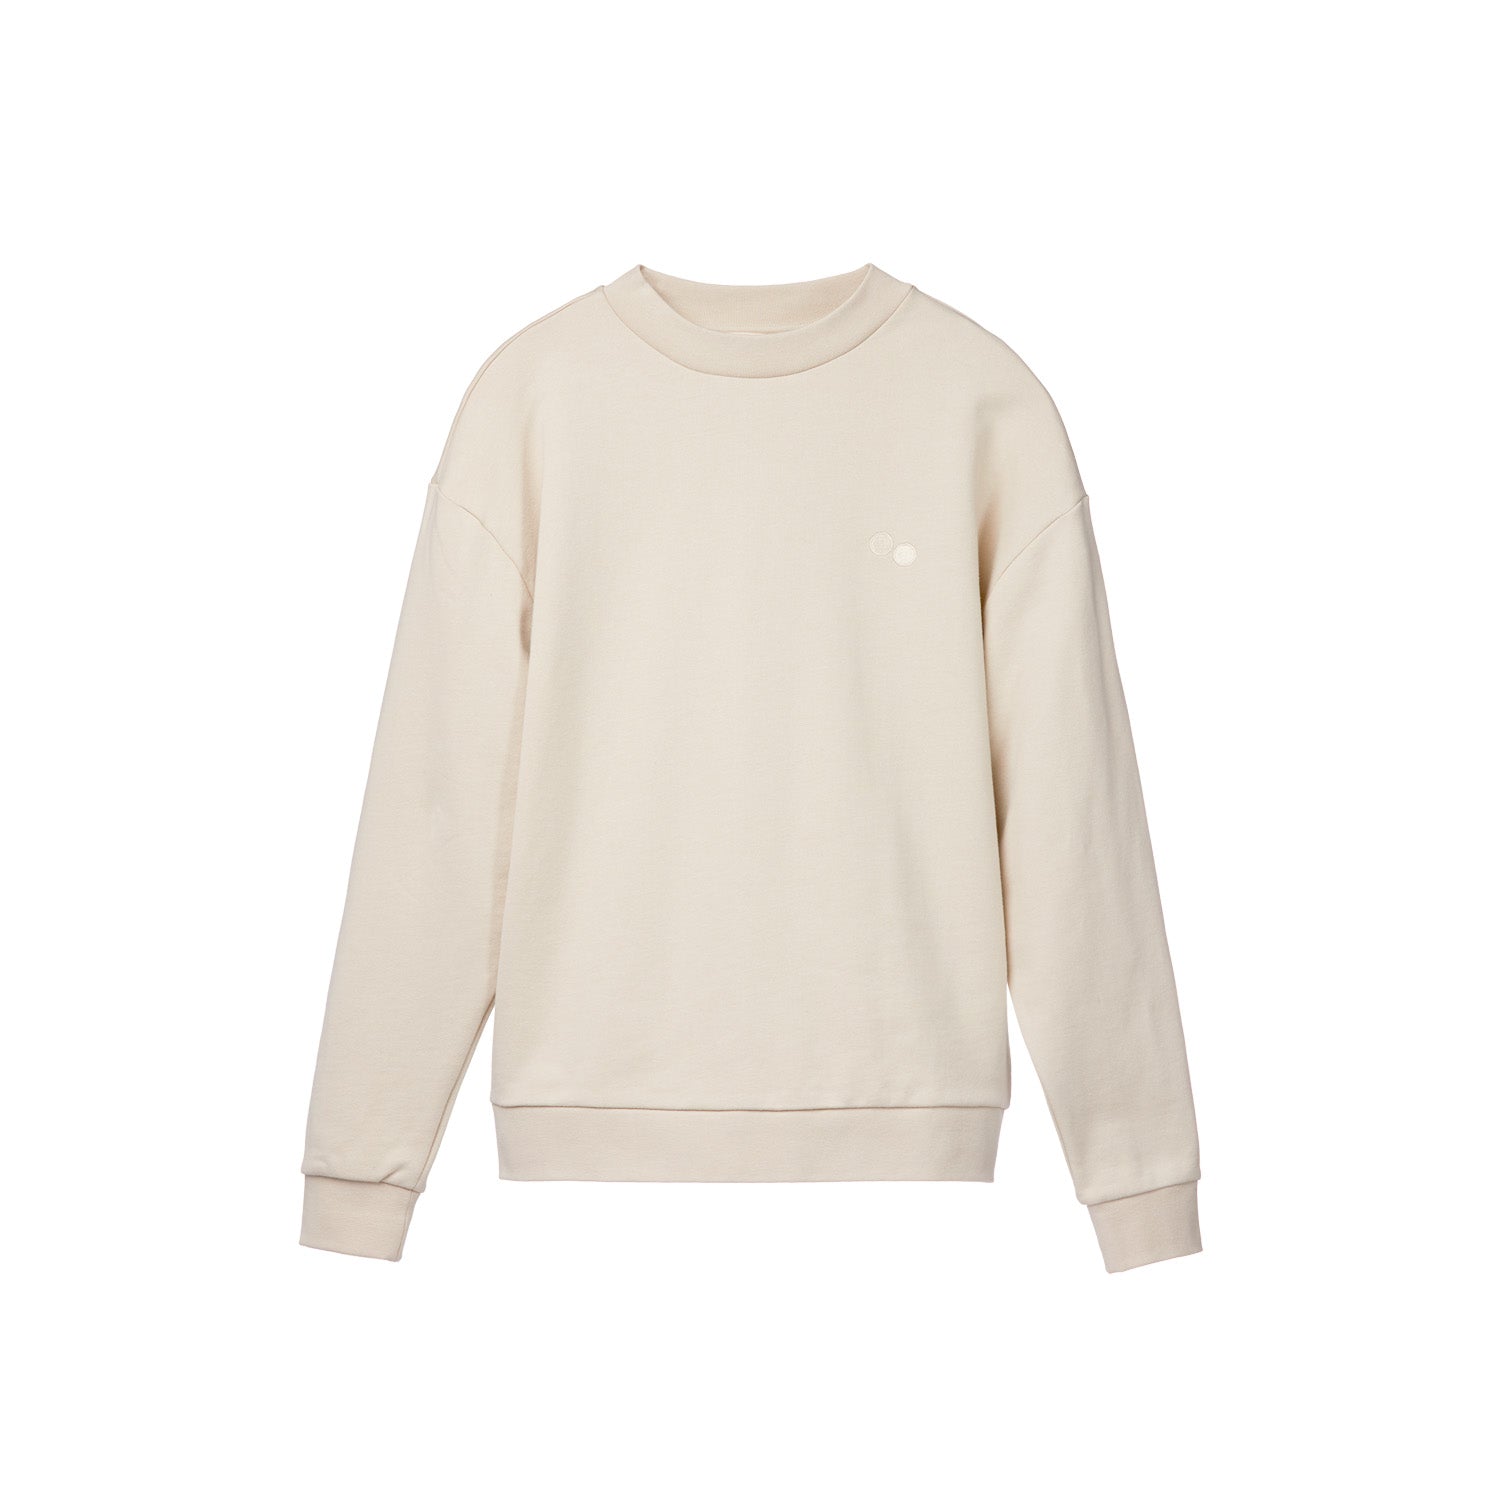 Unisex Sweatshirt - Clean Cut, Boxy Fit, and Comfortable – pinqponq